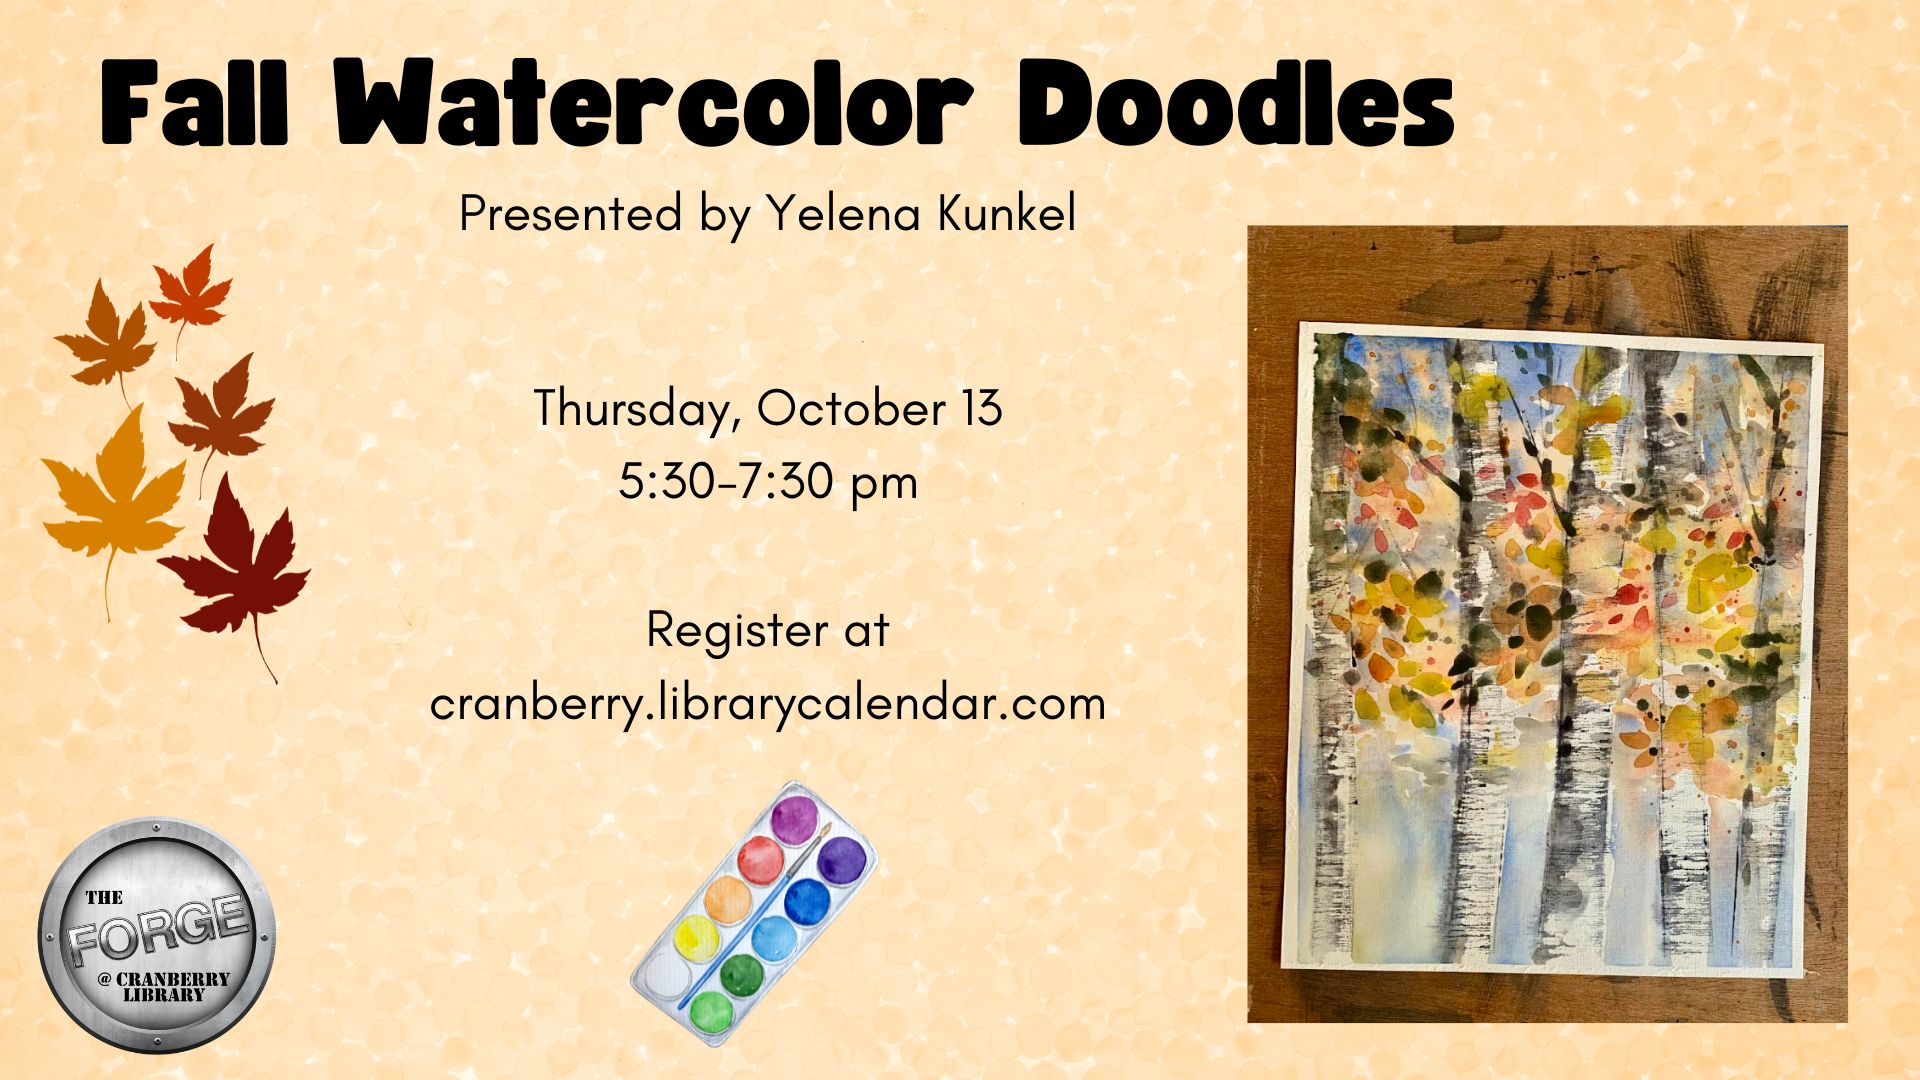 Flyer for Fall Watercolor Doodles class in The Forge